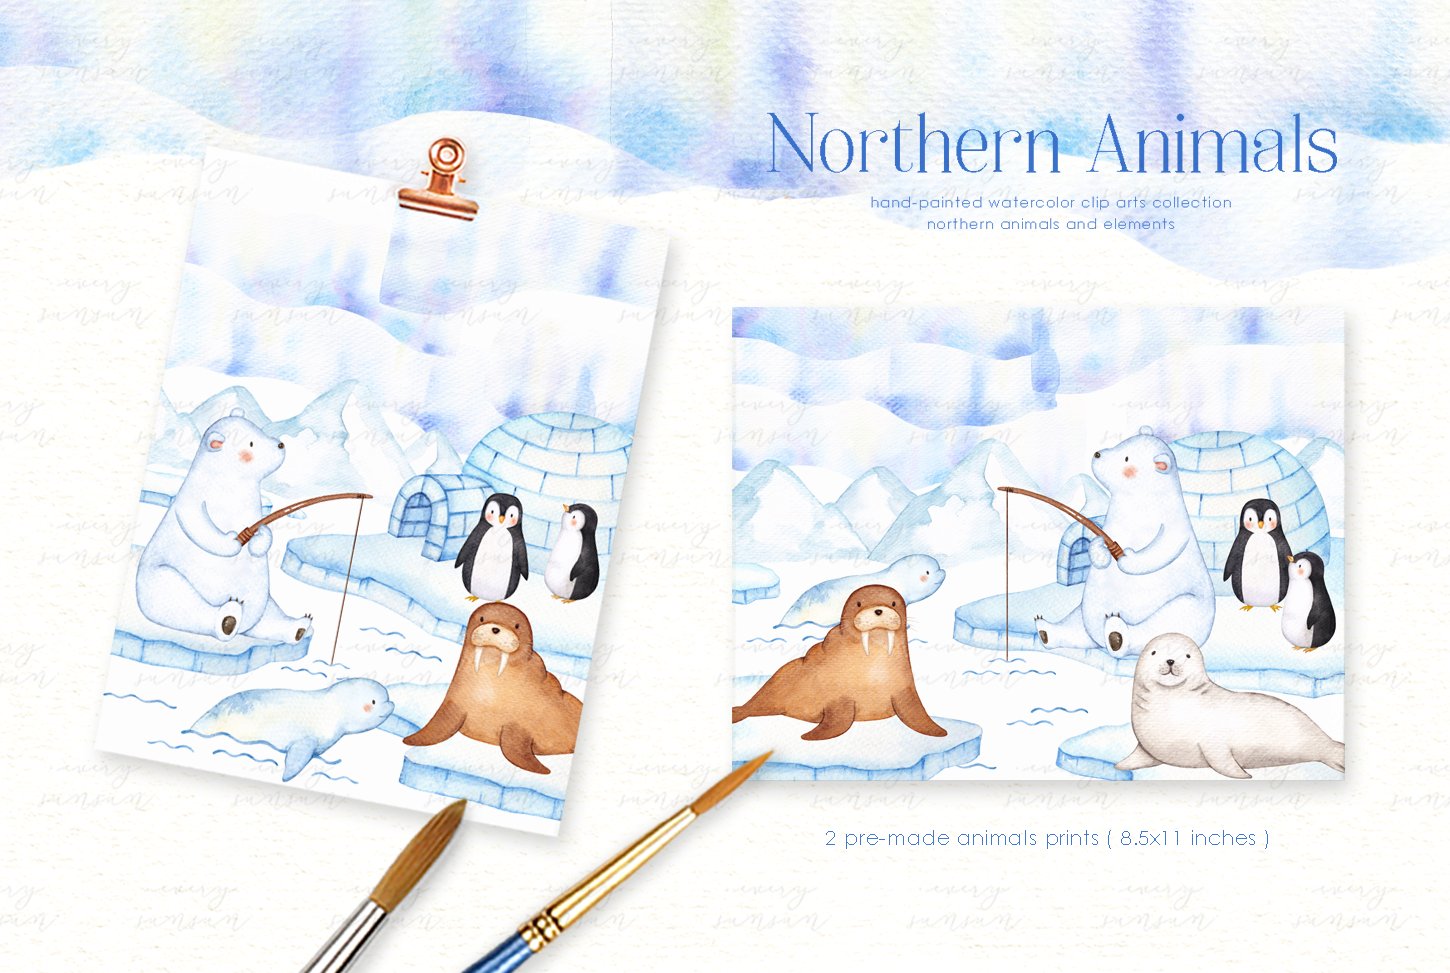 Perfect winter illustration for greeting cards.